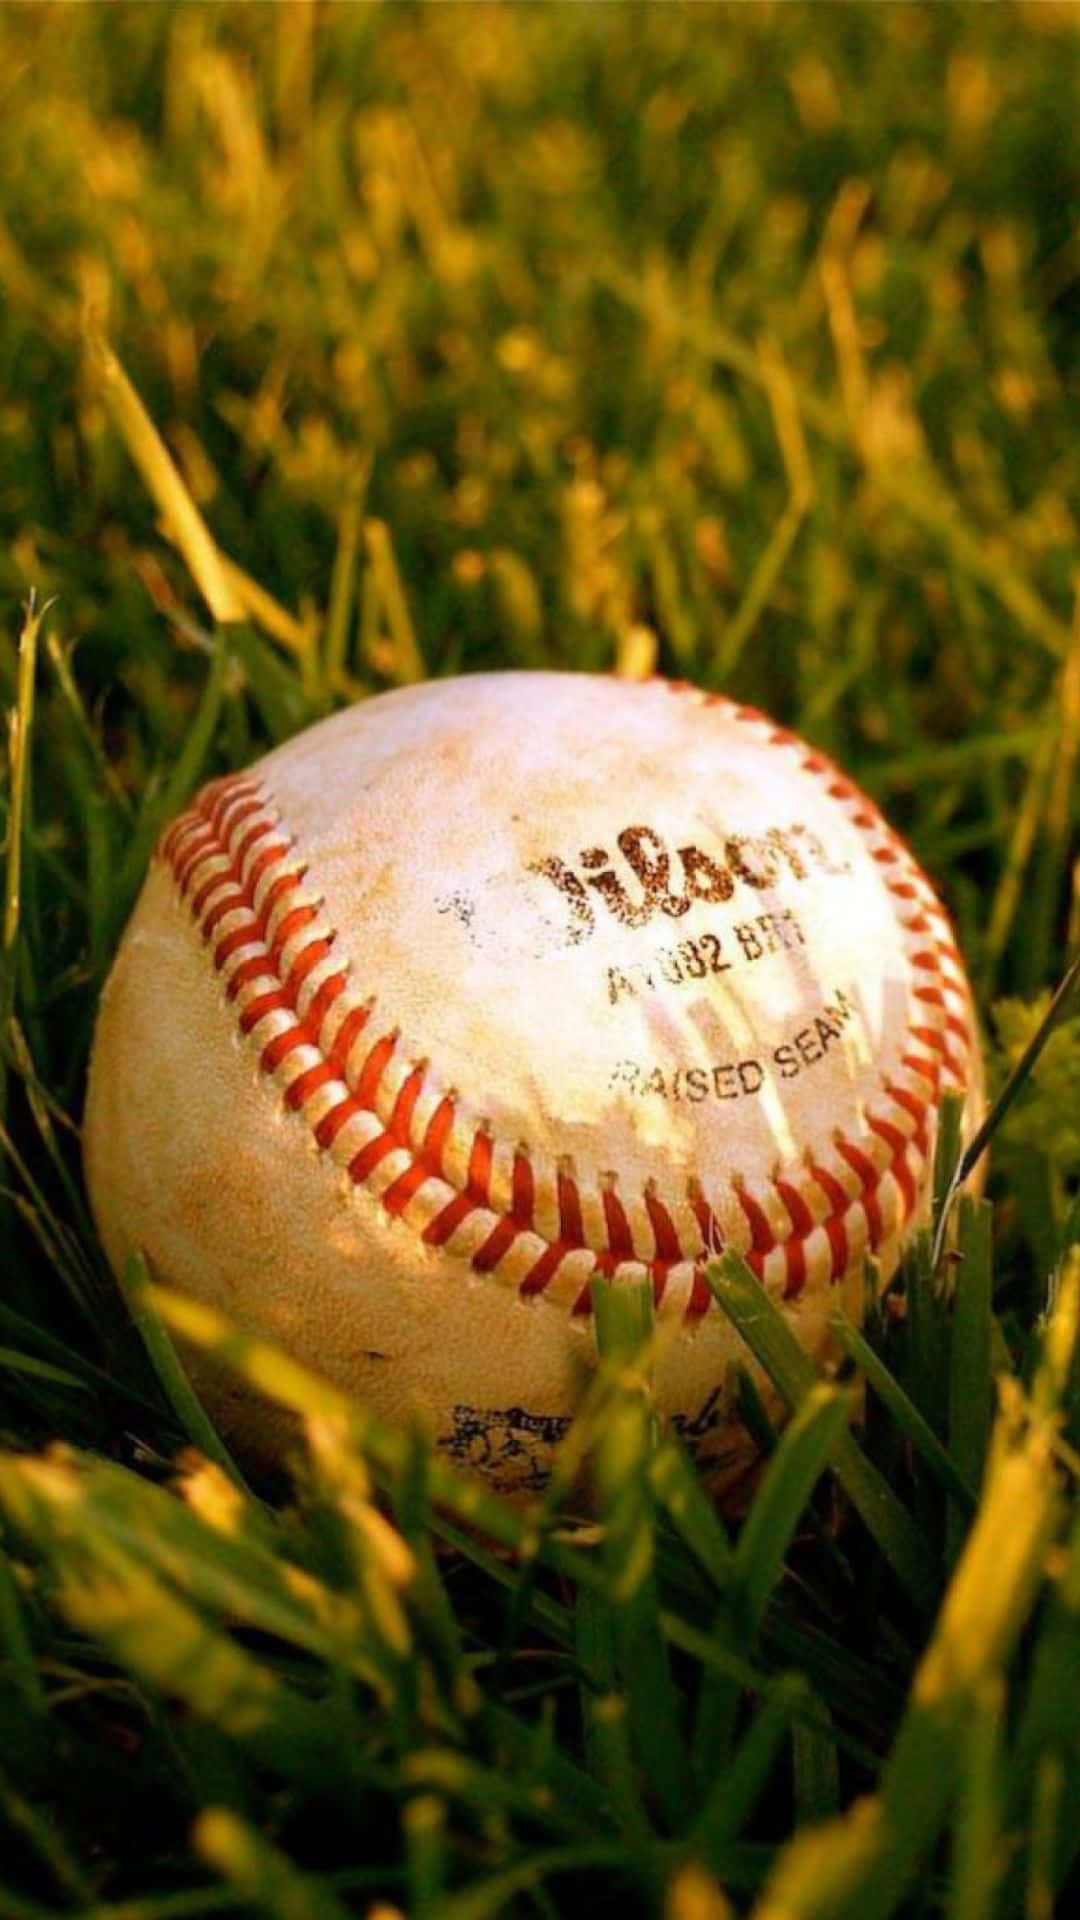 "The best thing about baseball: the feeling of hitting a home run!" Wallpaper